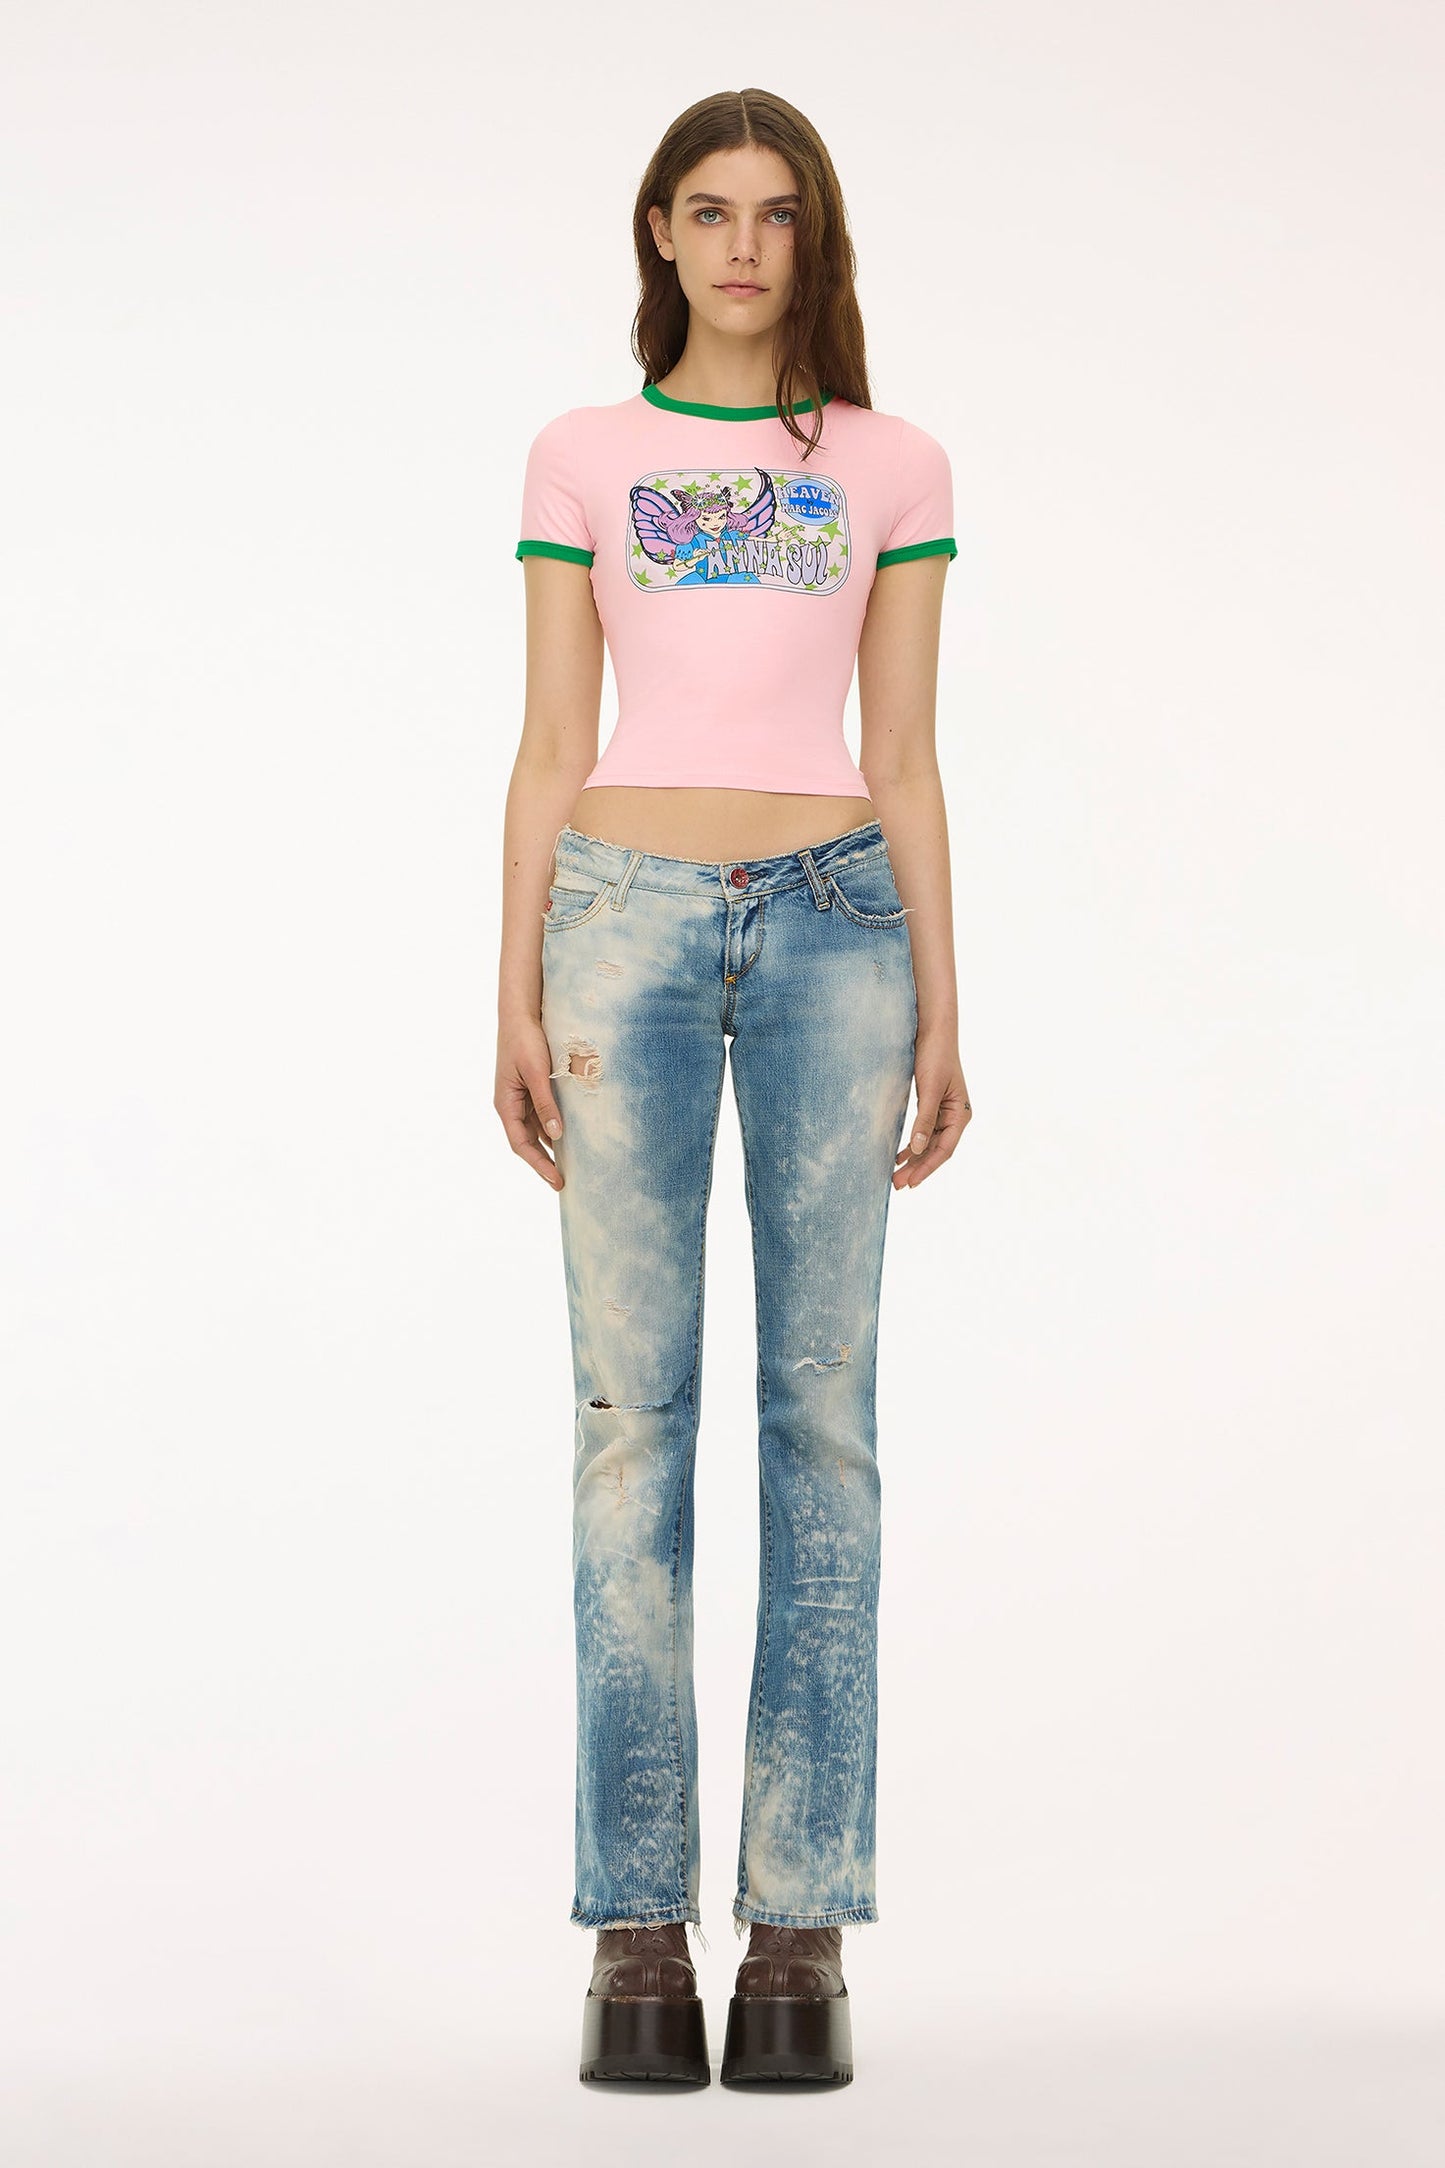 Limited Edition: Anna Sui x Heaven by Marc Jacobs Fairy Baby Tee Pink